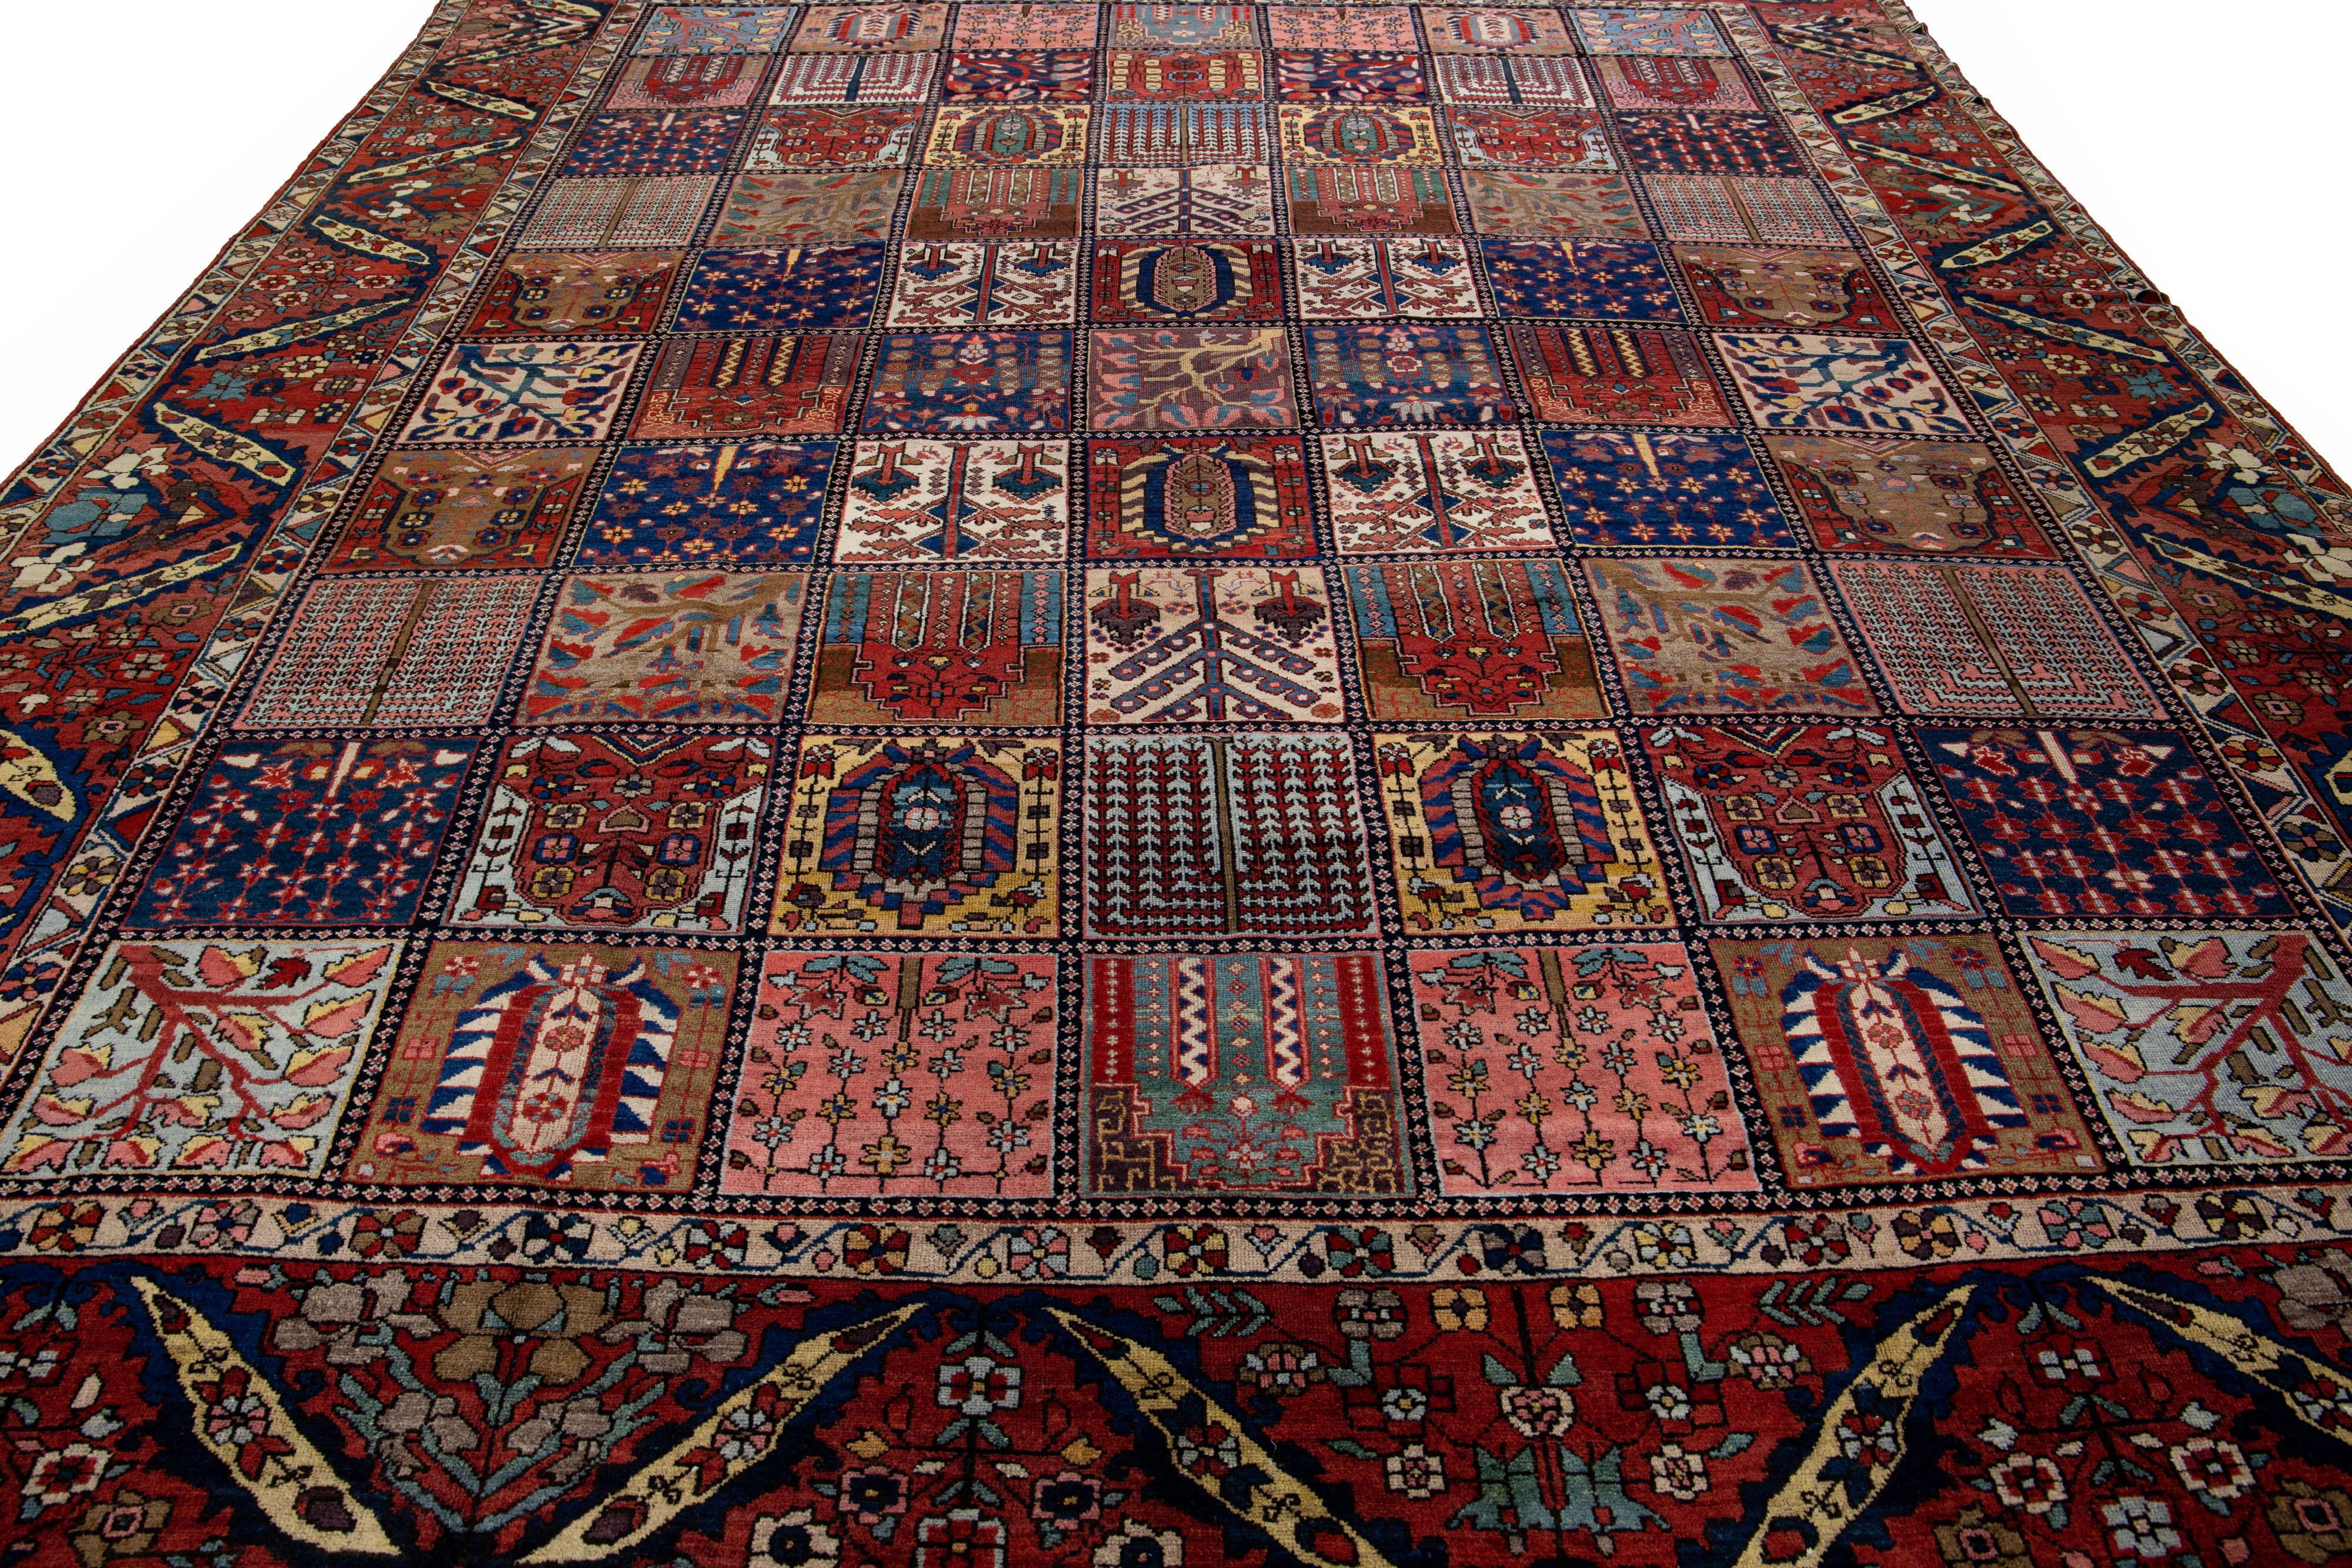 Beautiful Antique Bakhtiari hand-knotted wool rug with a rust color field. This Persian piece has an all-over classic multicolor pattern design.

This rug measures 11'7